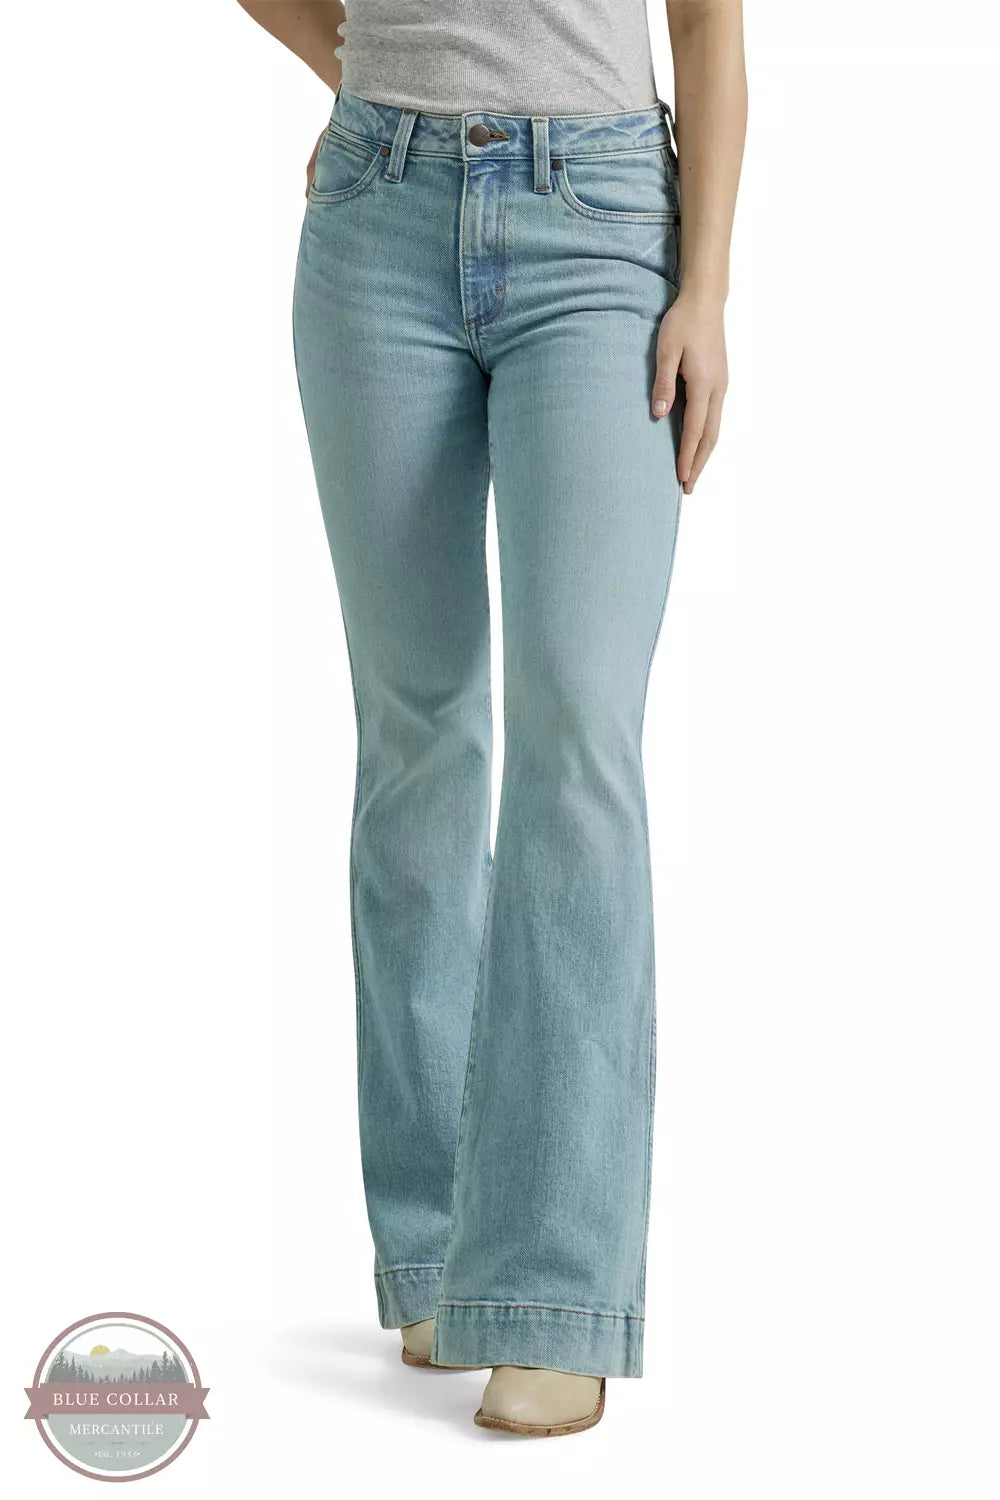 Wrangler 112346618 Bailey Mid Rise Trouser Jeans Front View